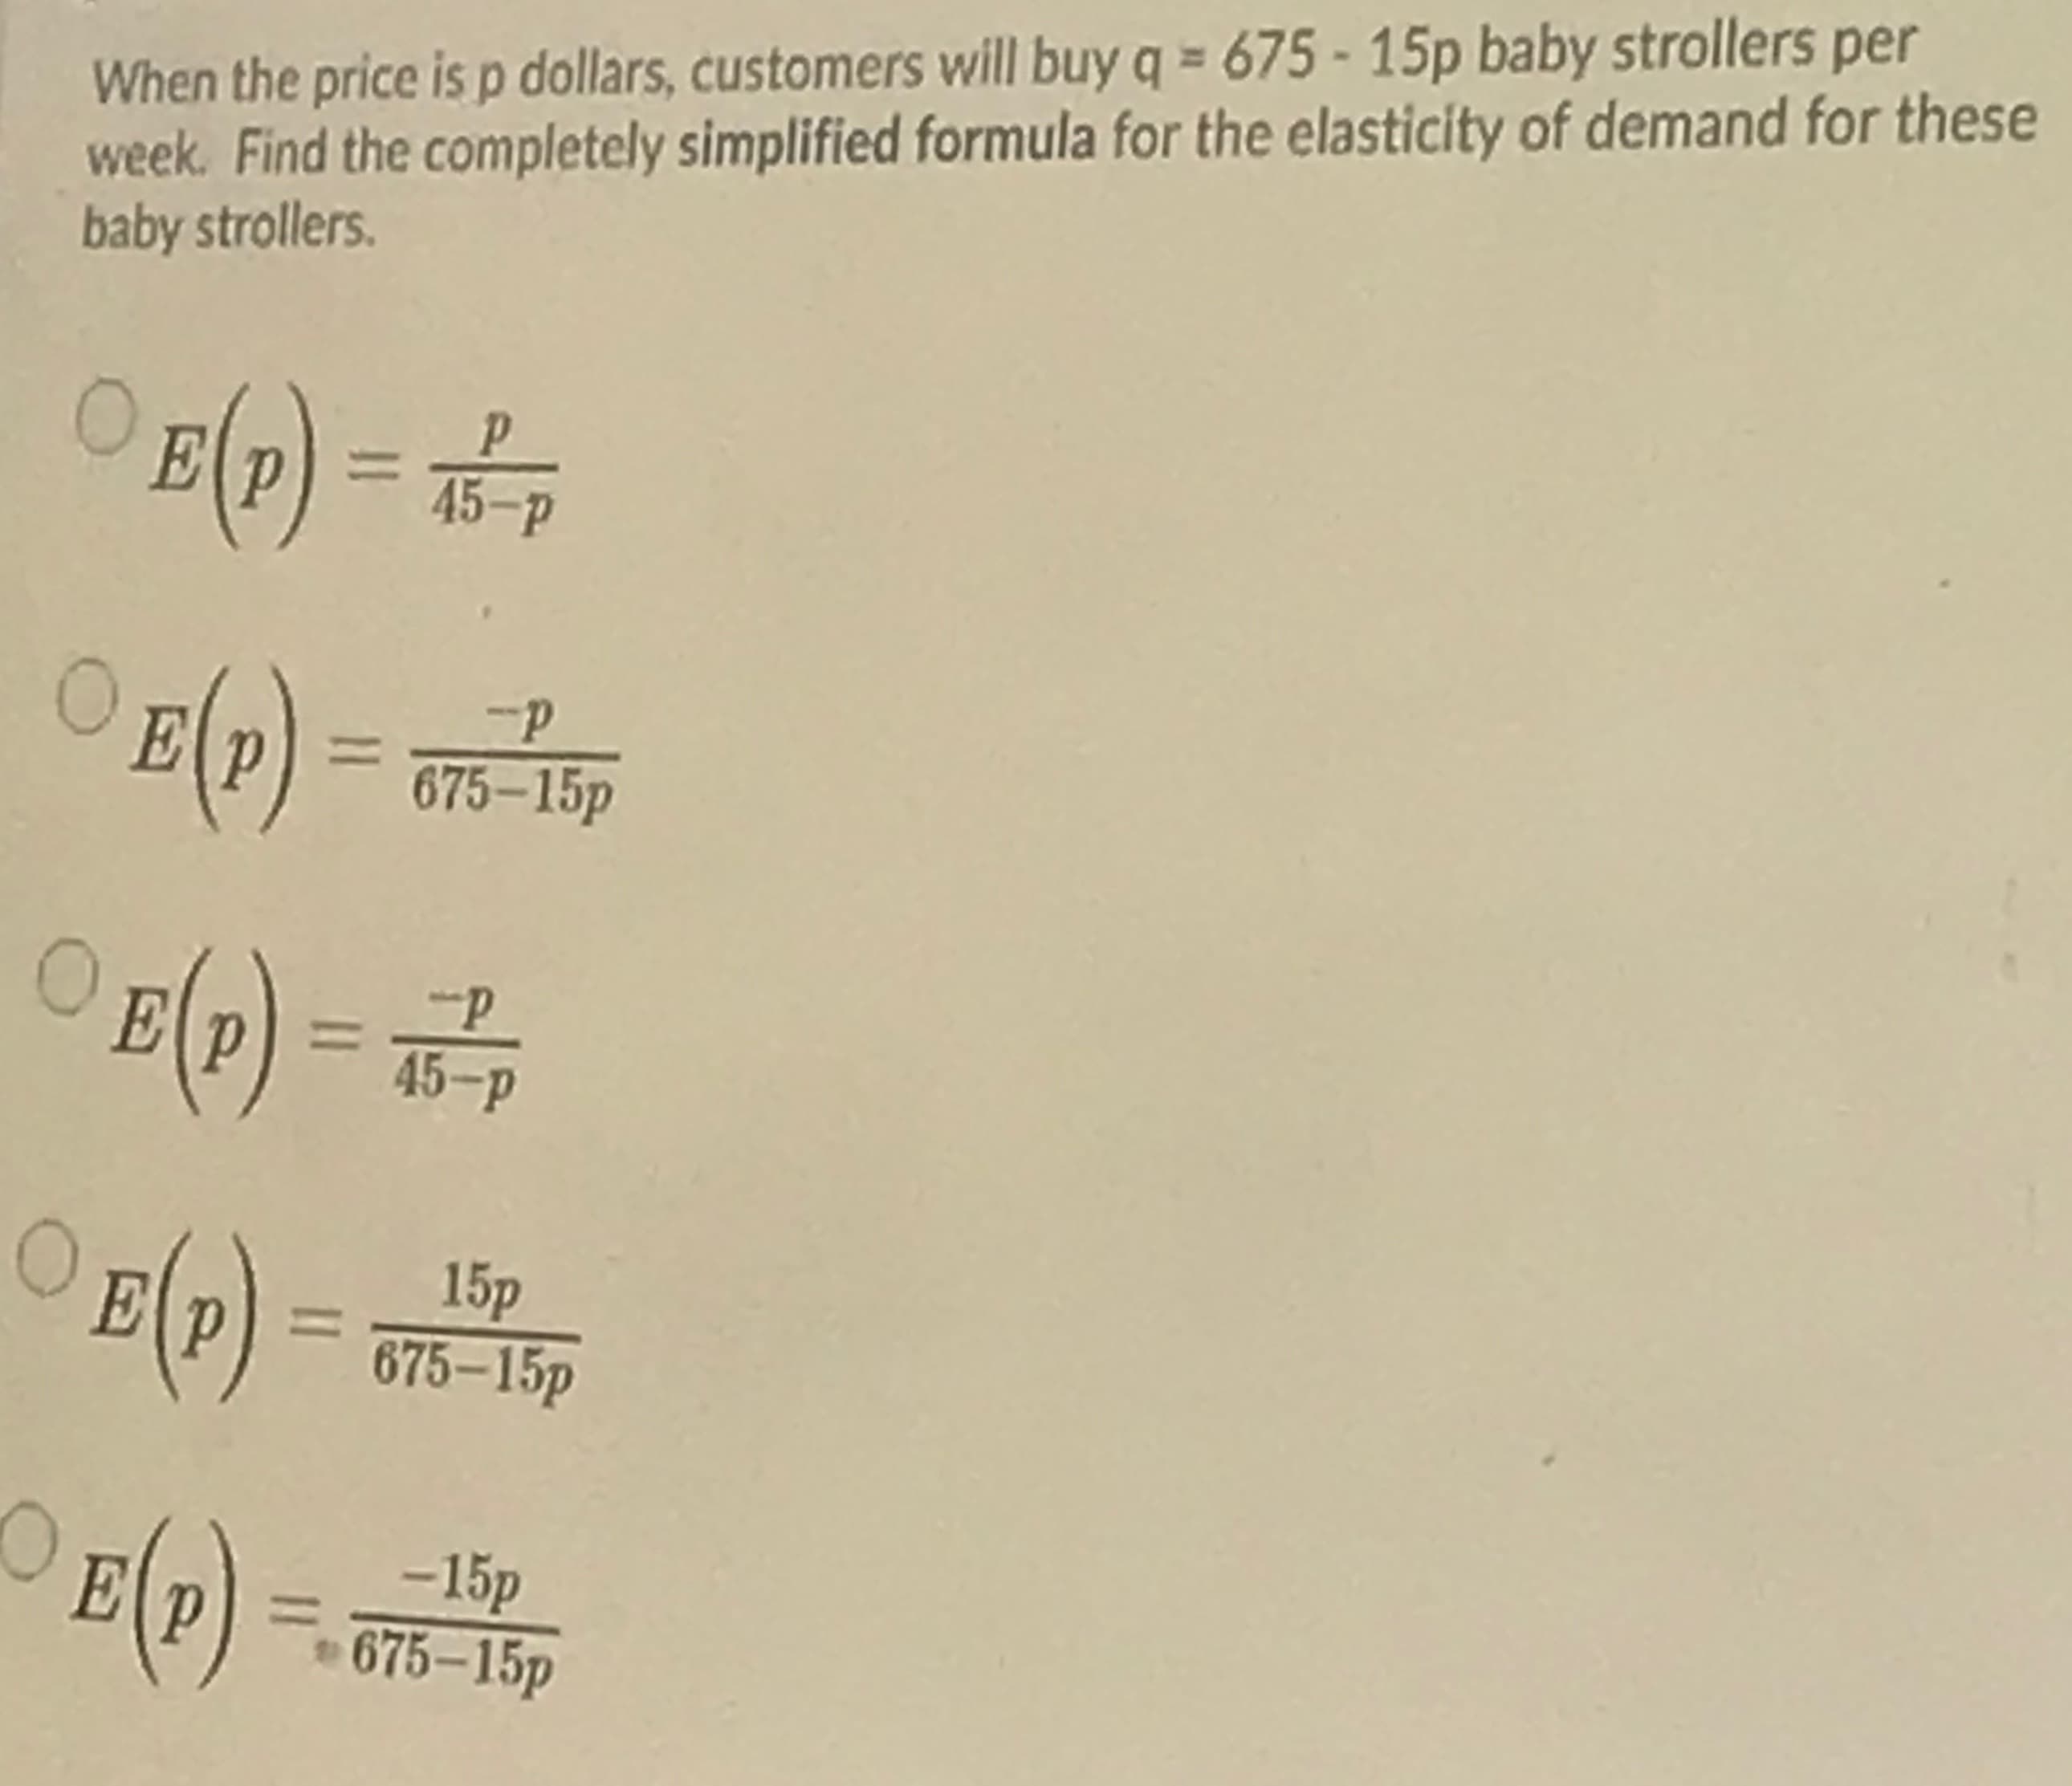 When the price is p dollars, customers will buy q = 675 - 15p baby strollers per
week. Find the completely simplified formula for the elasticity of demand for thes
baby strollers.
OE(2) = %
45-P
